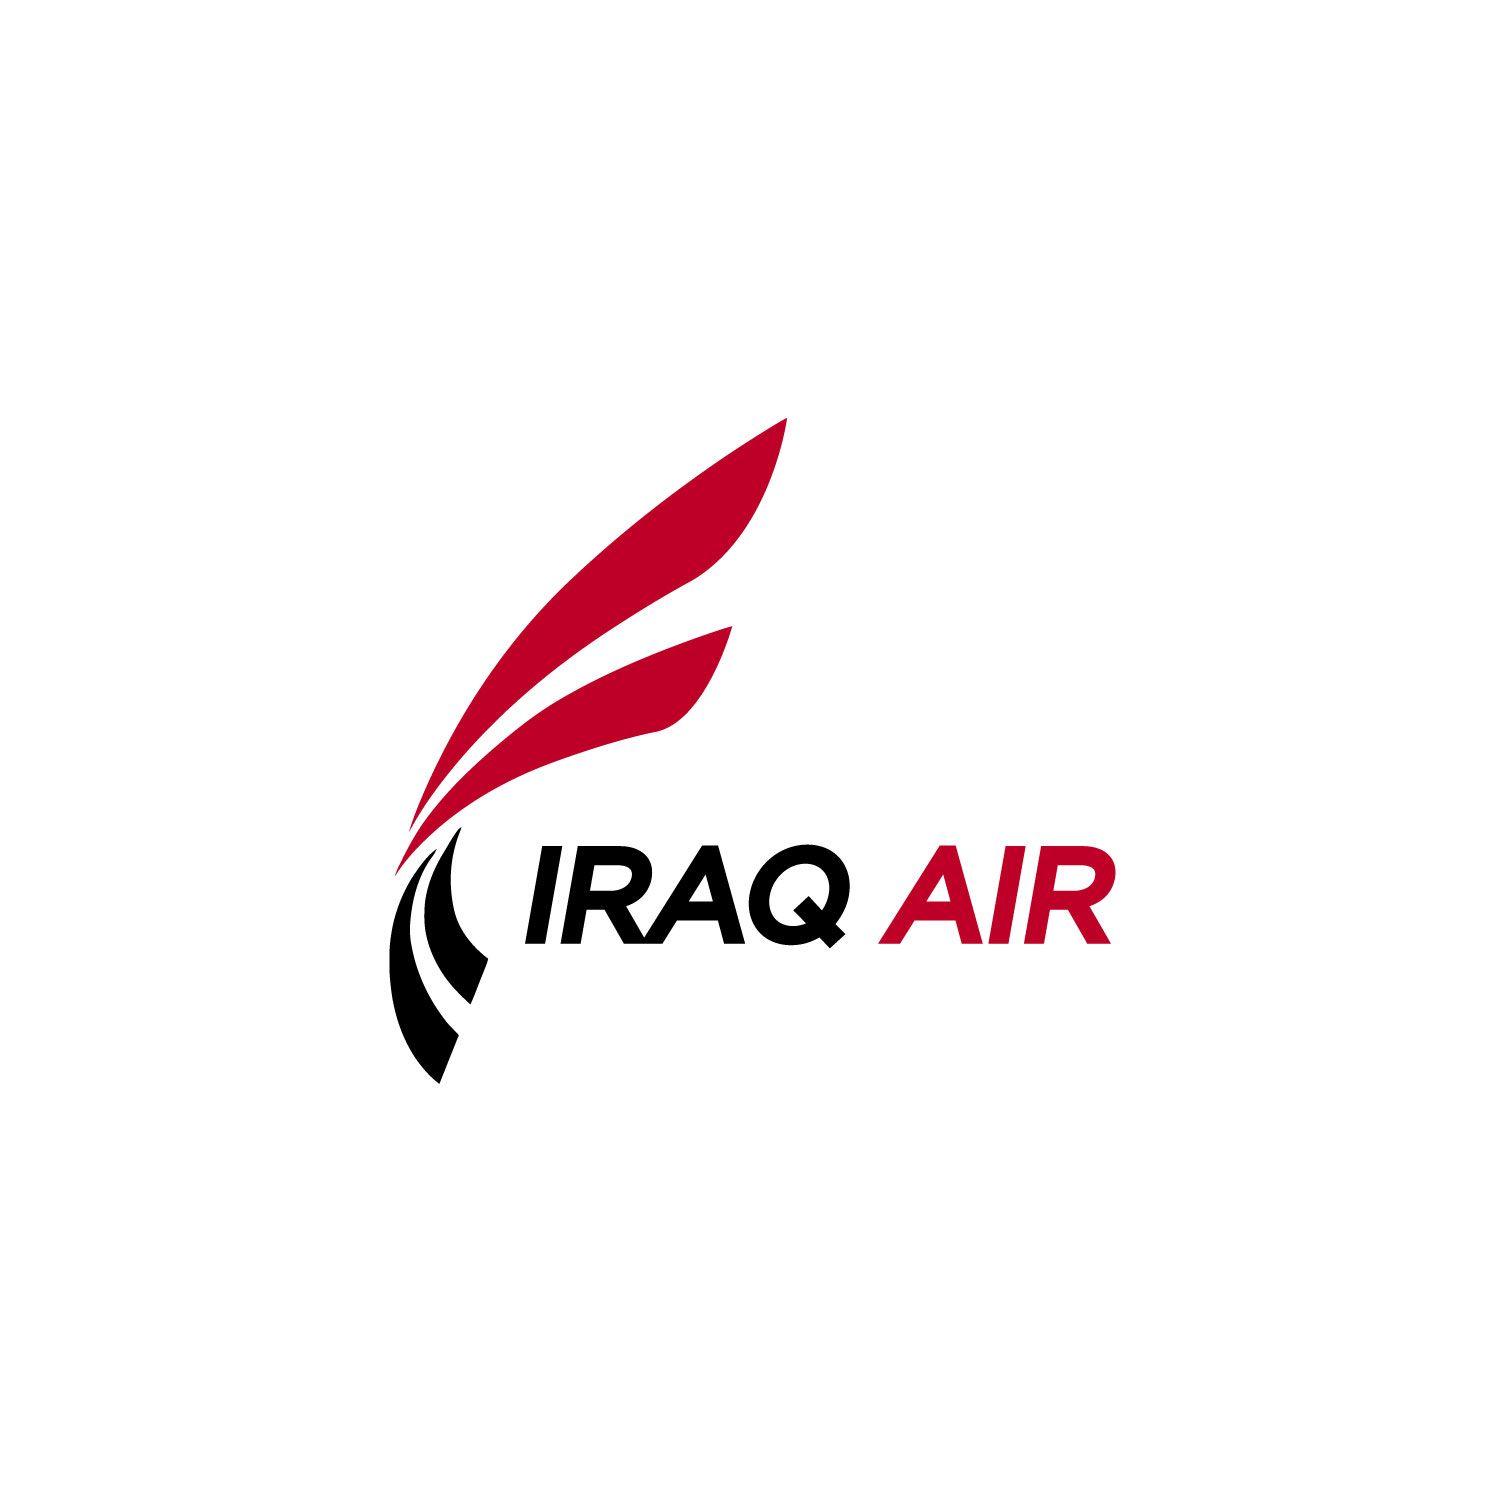 Iraq Logo - Bold, Playful, Airline Logo Design for Iraq Air by Andre Swaby ...